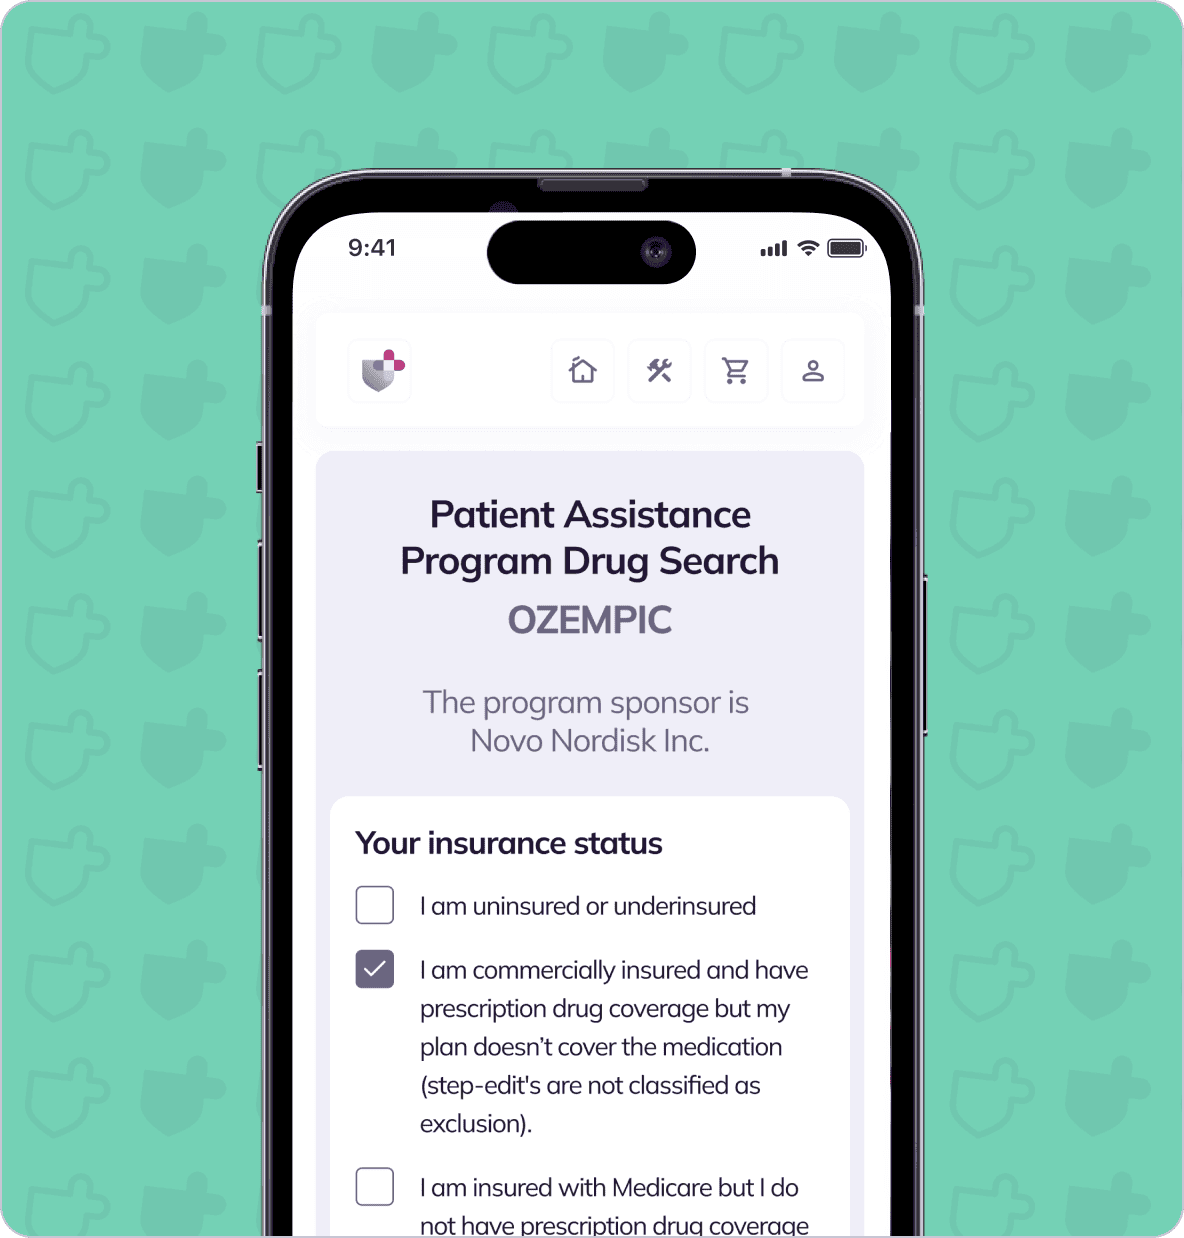 A smartphone display showing a Patient Assistance Program Drug Search for Ozempic, sponsored by Novo Nordisk Inc. The user selects an insurance status option indicating prescription drug coverage.